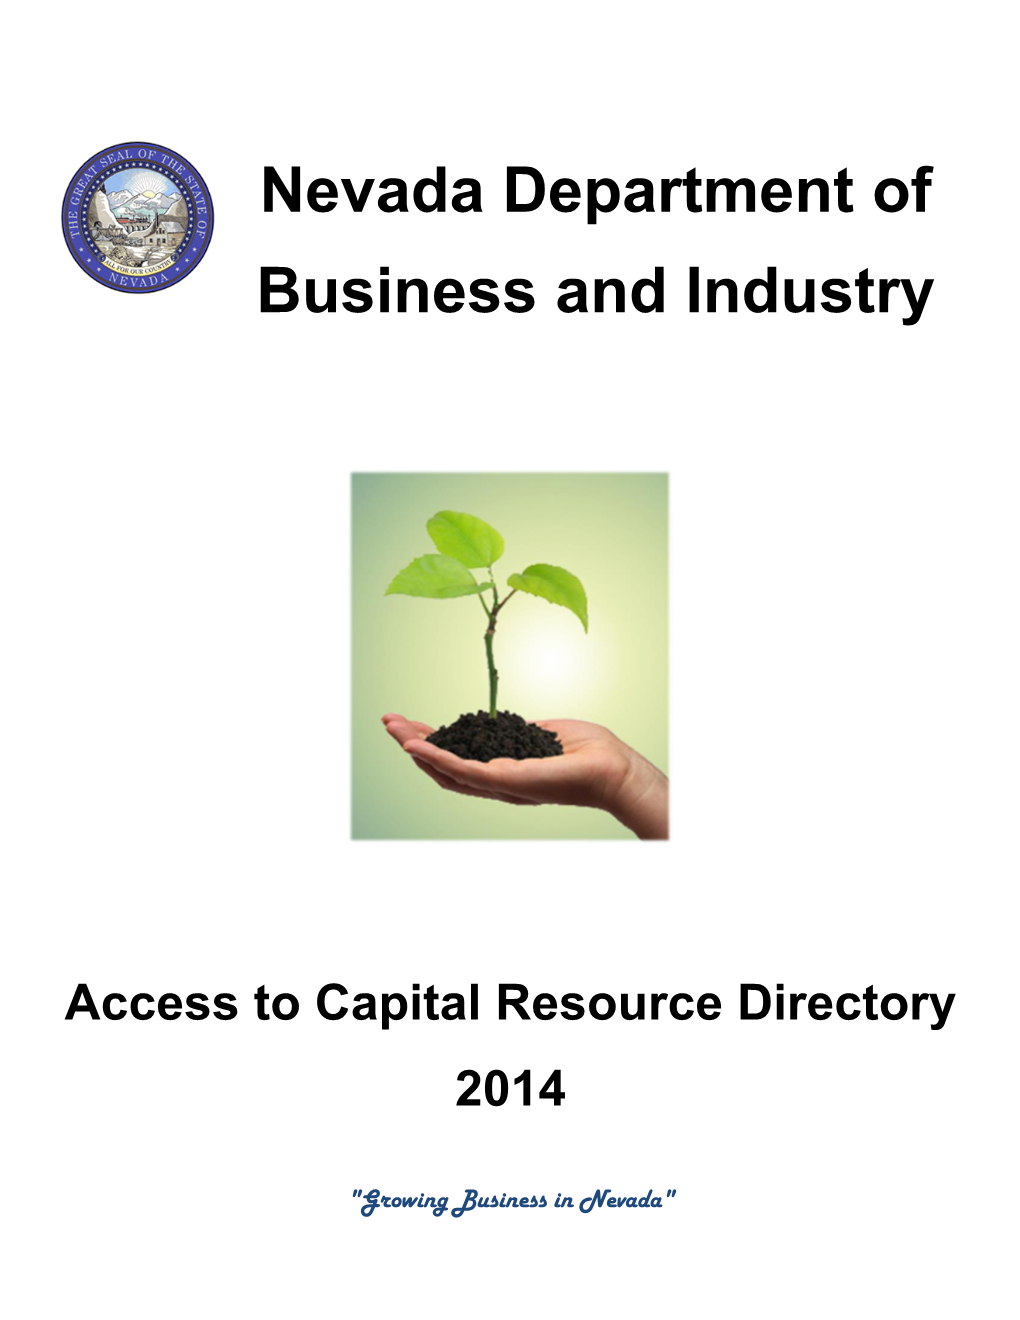 Nevada Department of Business and Industry